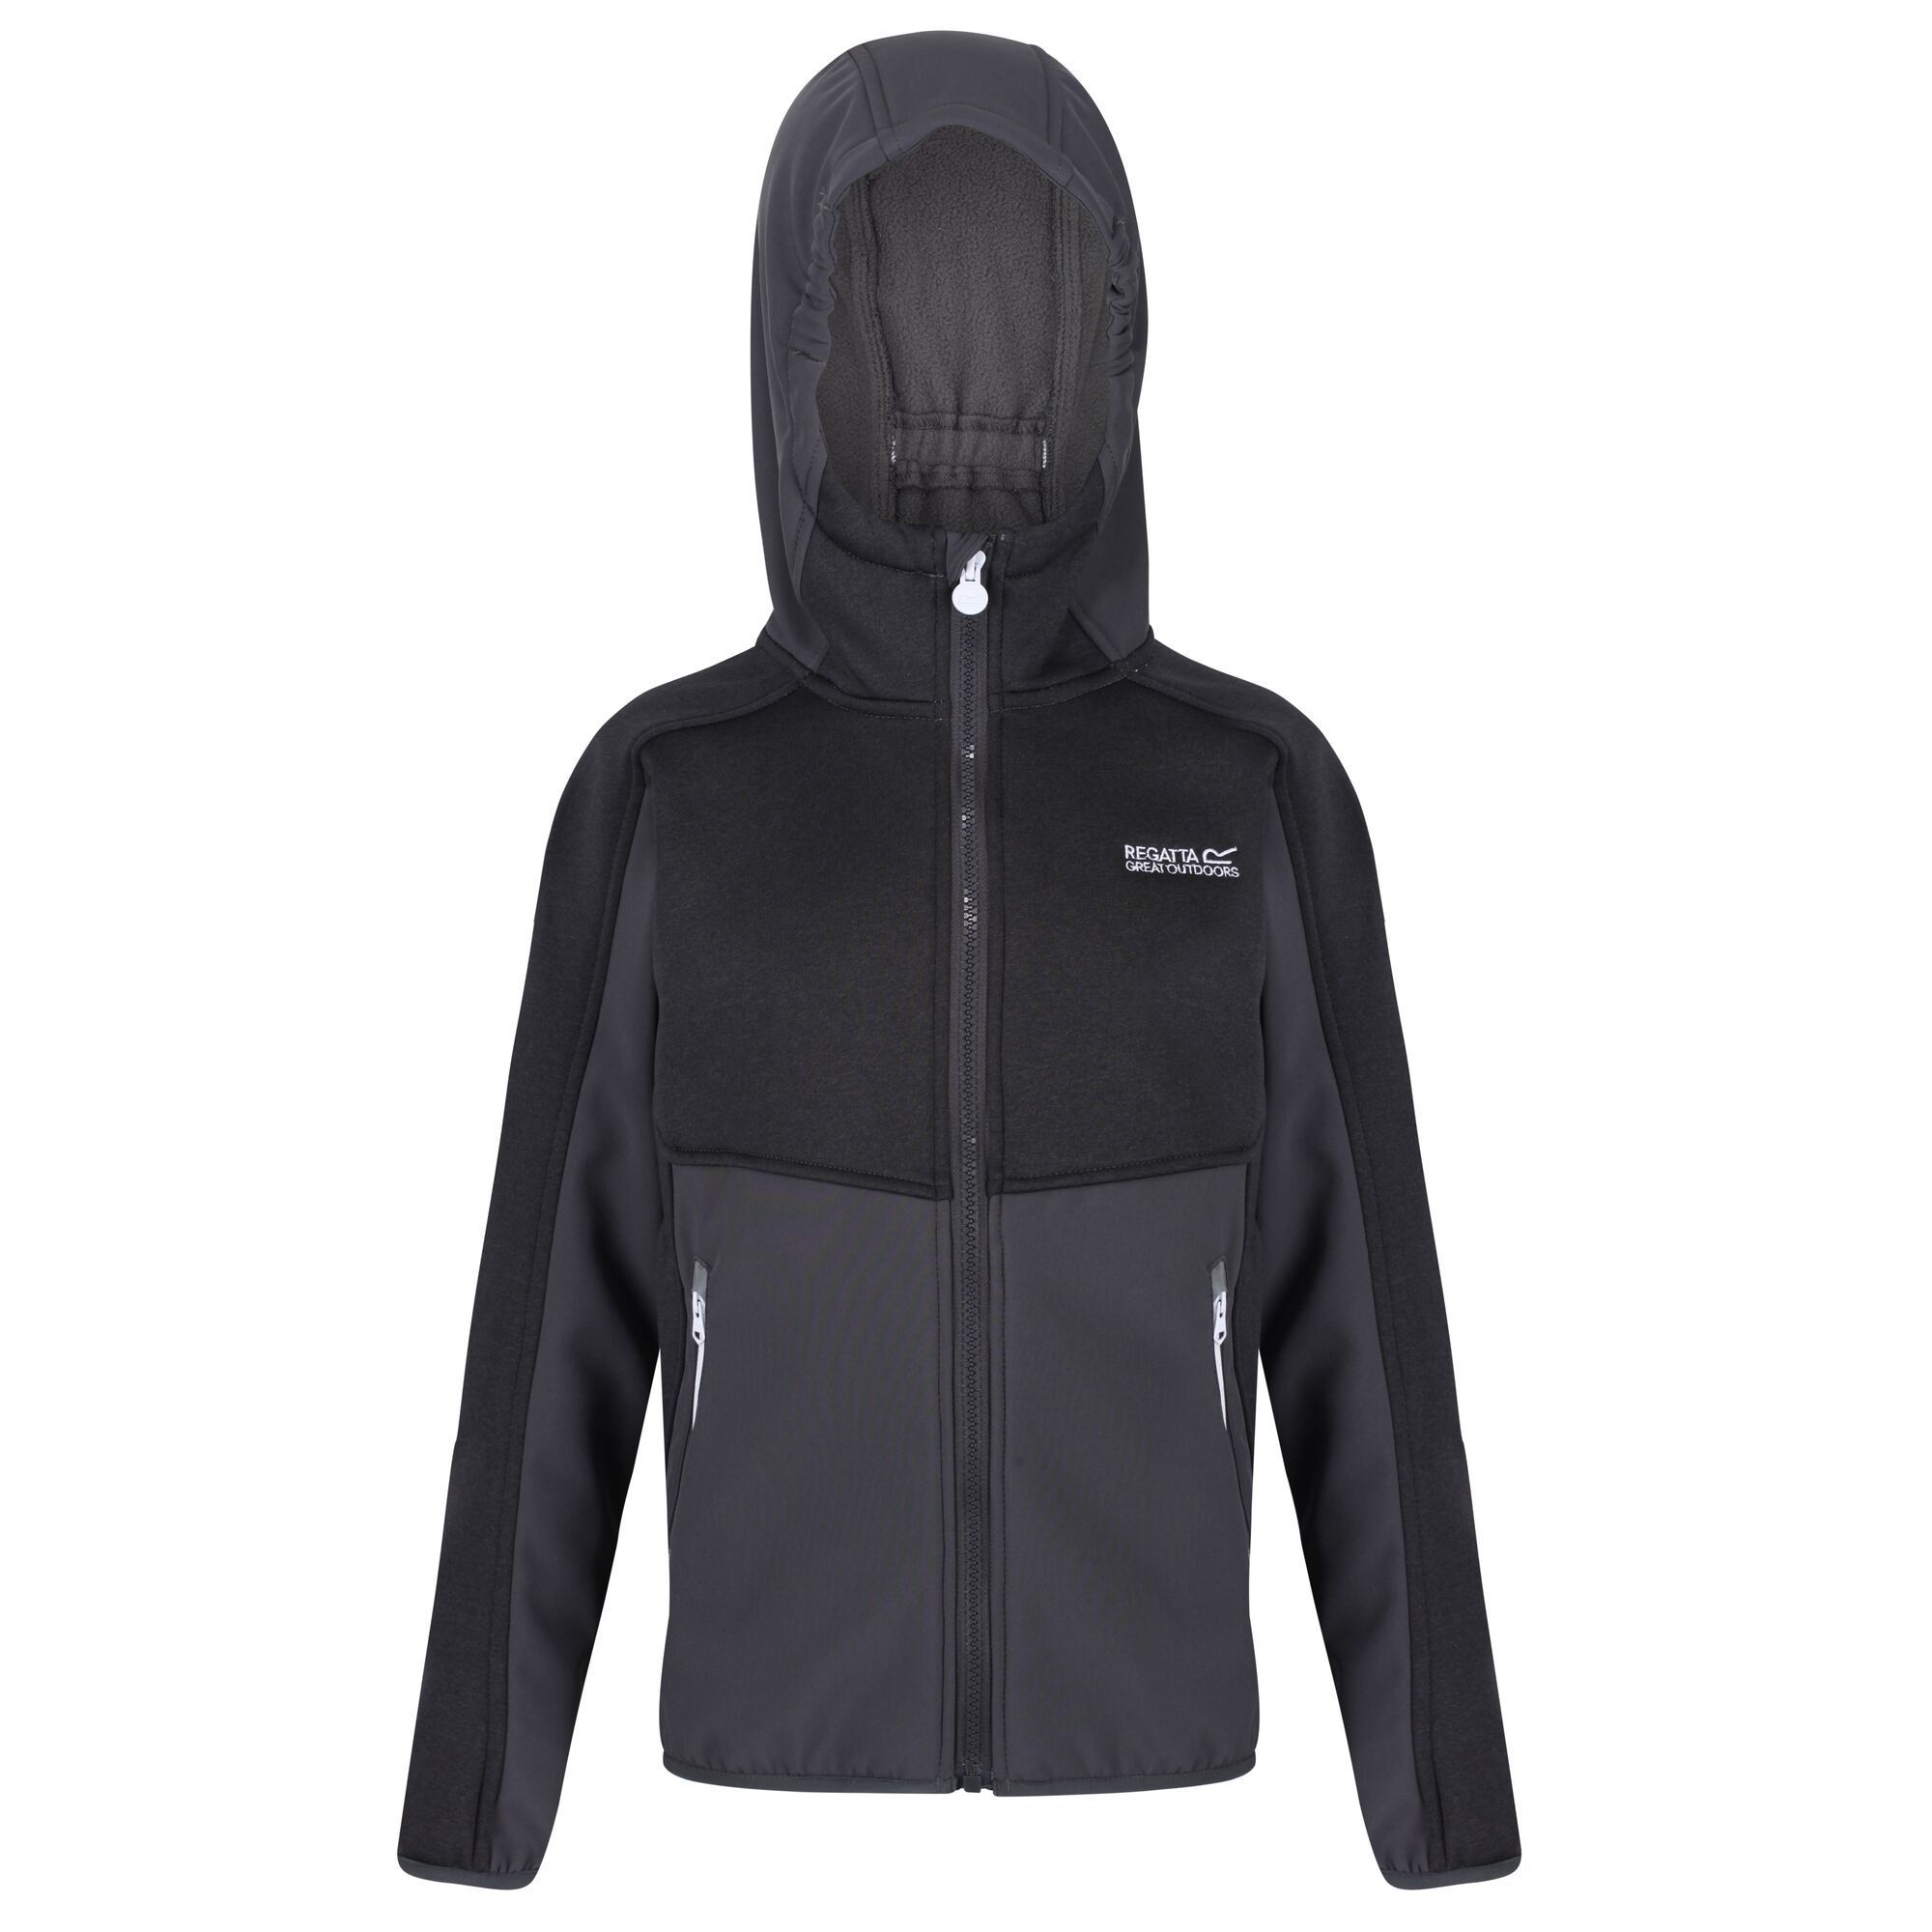 Material: 96% Polyester, 4% Elastane. Durable, water-repellent jacket made from warm backed woven stretch Softshell fabric. Elasticated hood and stretch binding to cuffs and hem. 2 zipped lower pockets. Regatta outdoors logo badge on the sleeve.